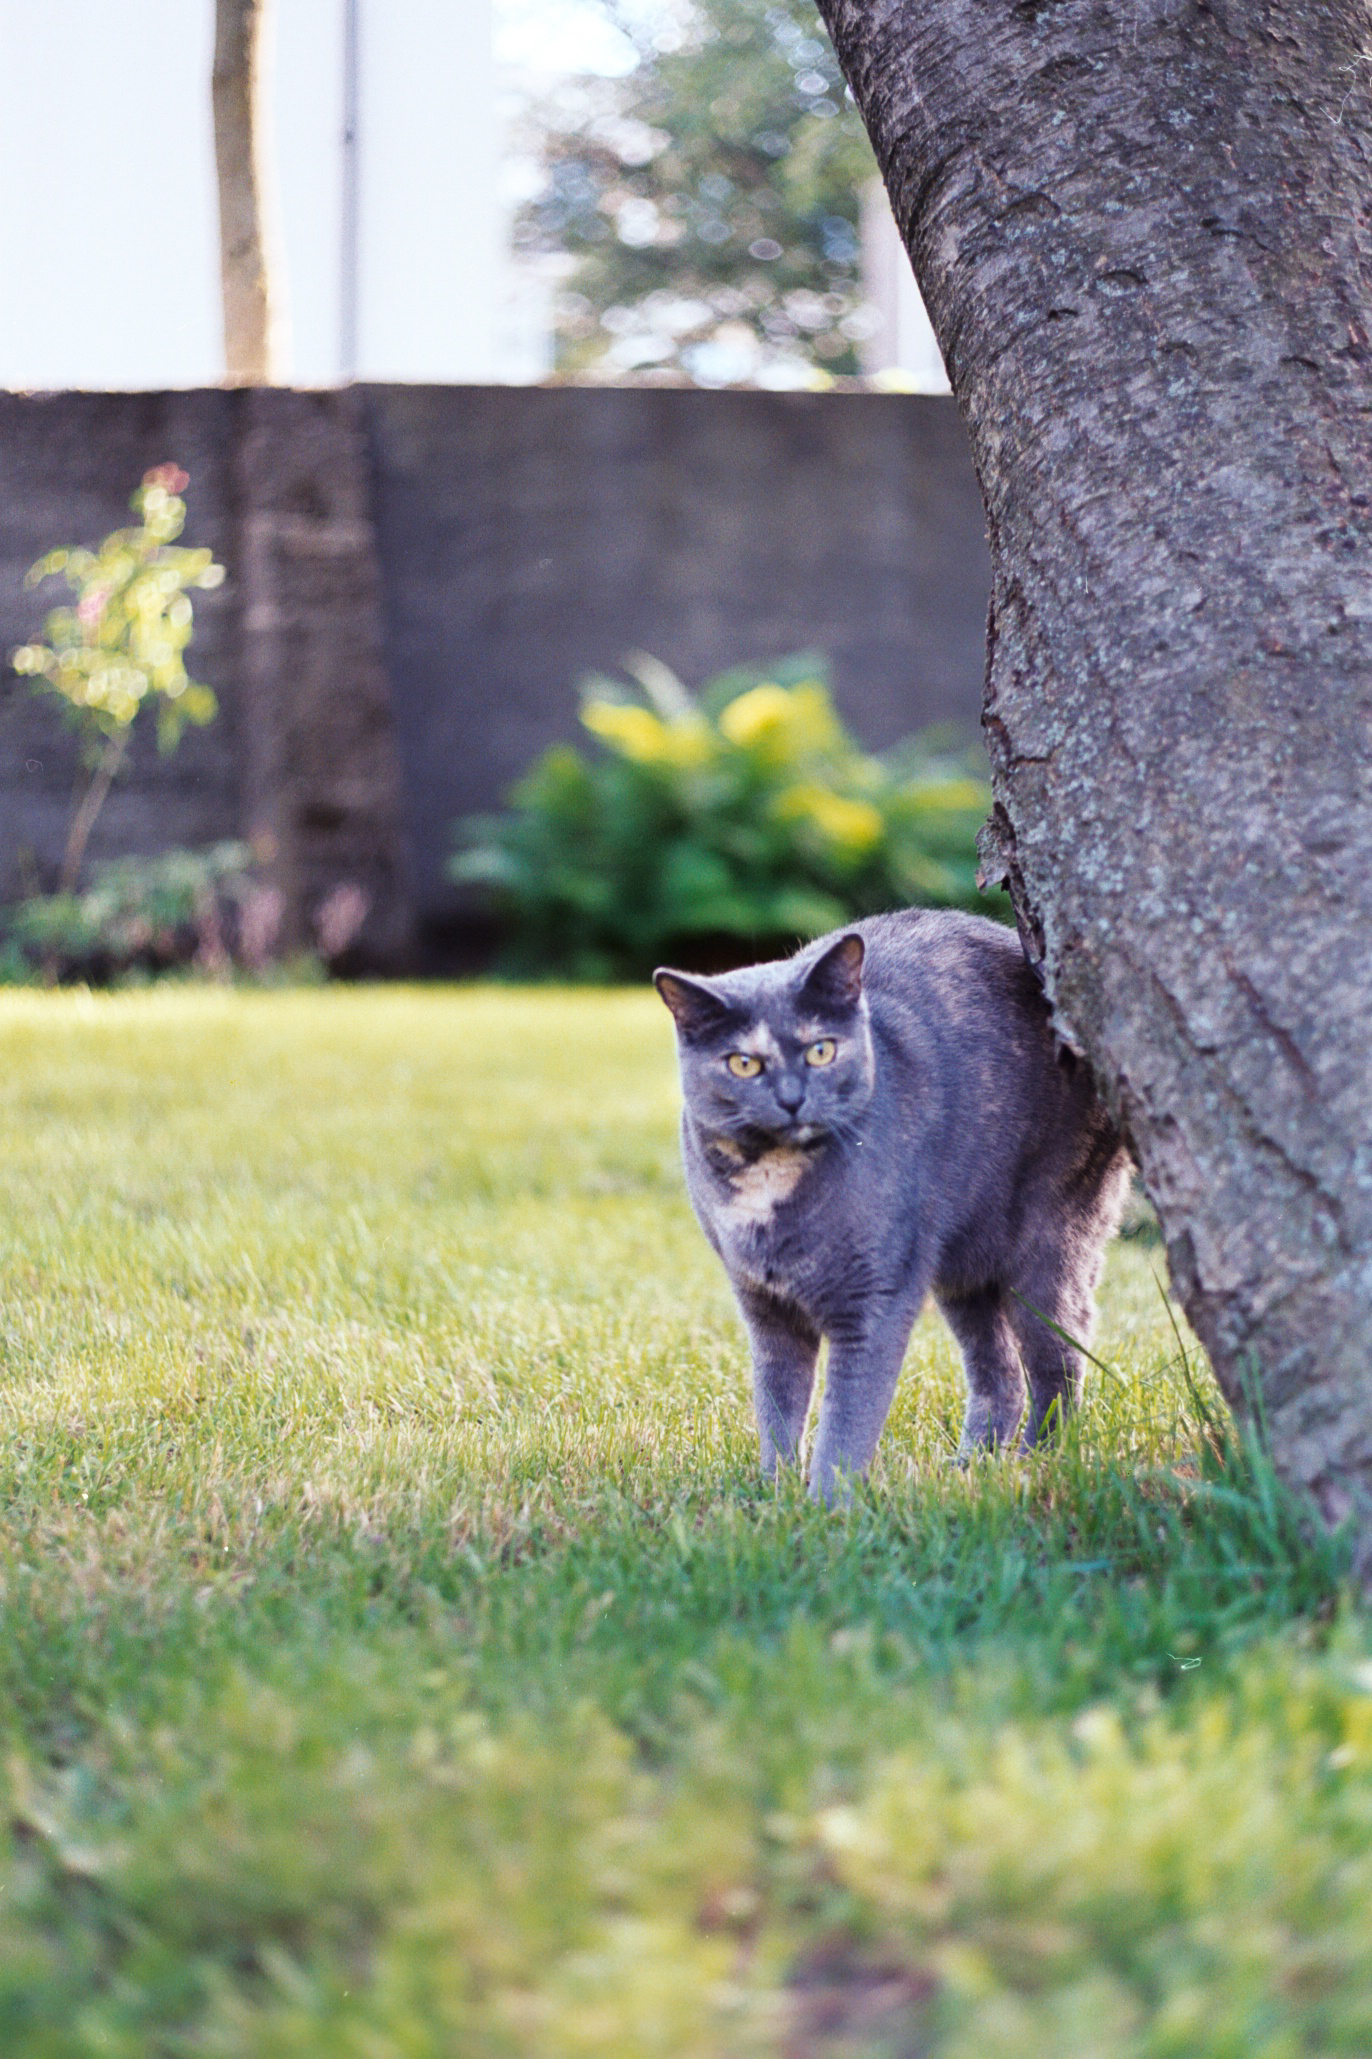 The cat pauses for a moment between zoomies and stands by a tree